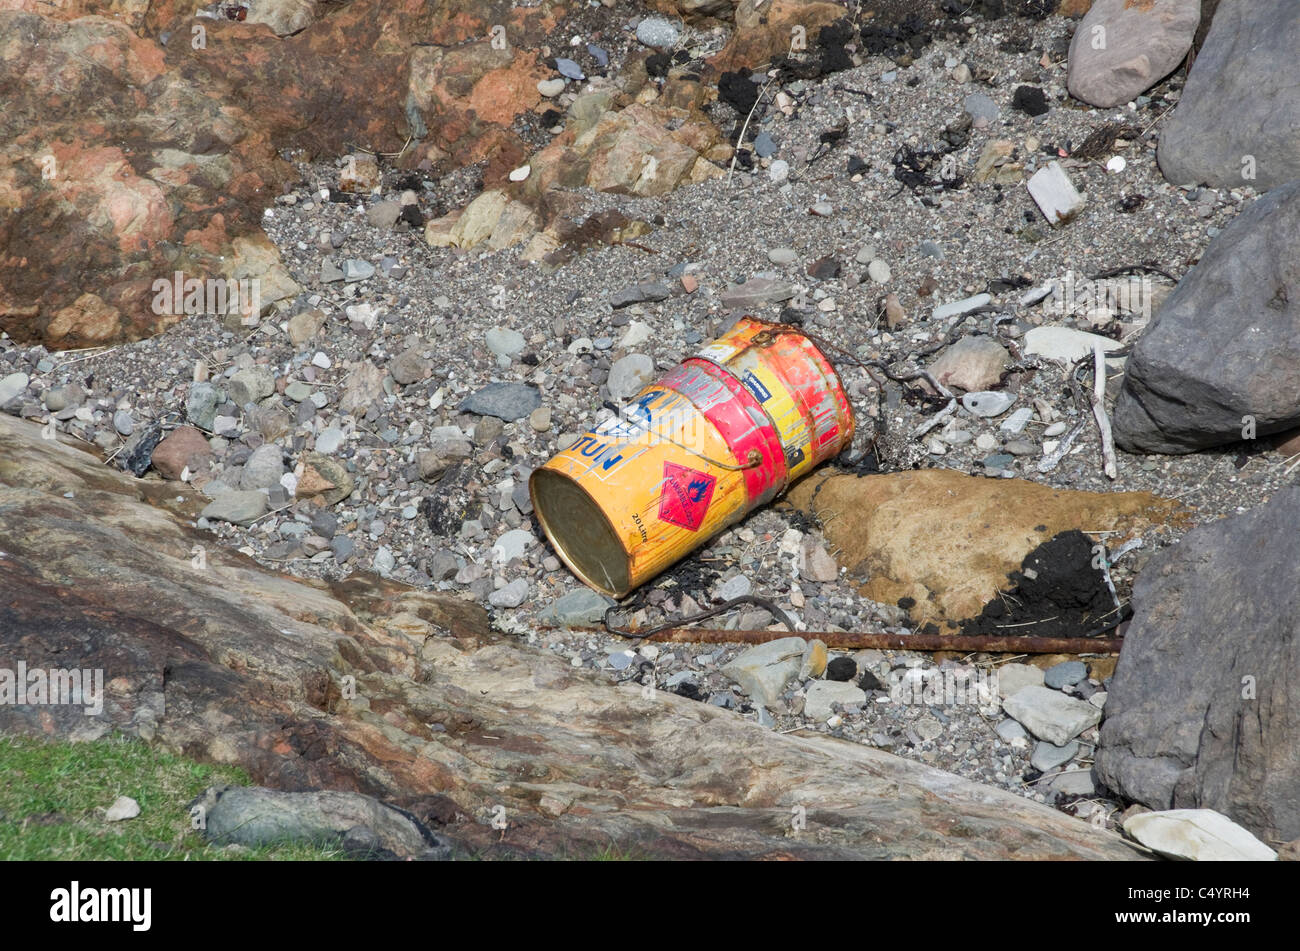 UK, Britain, Europe. Flammable liquid hazard sign on a rusty container washed up on the shore Stock Photo